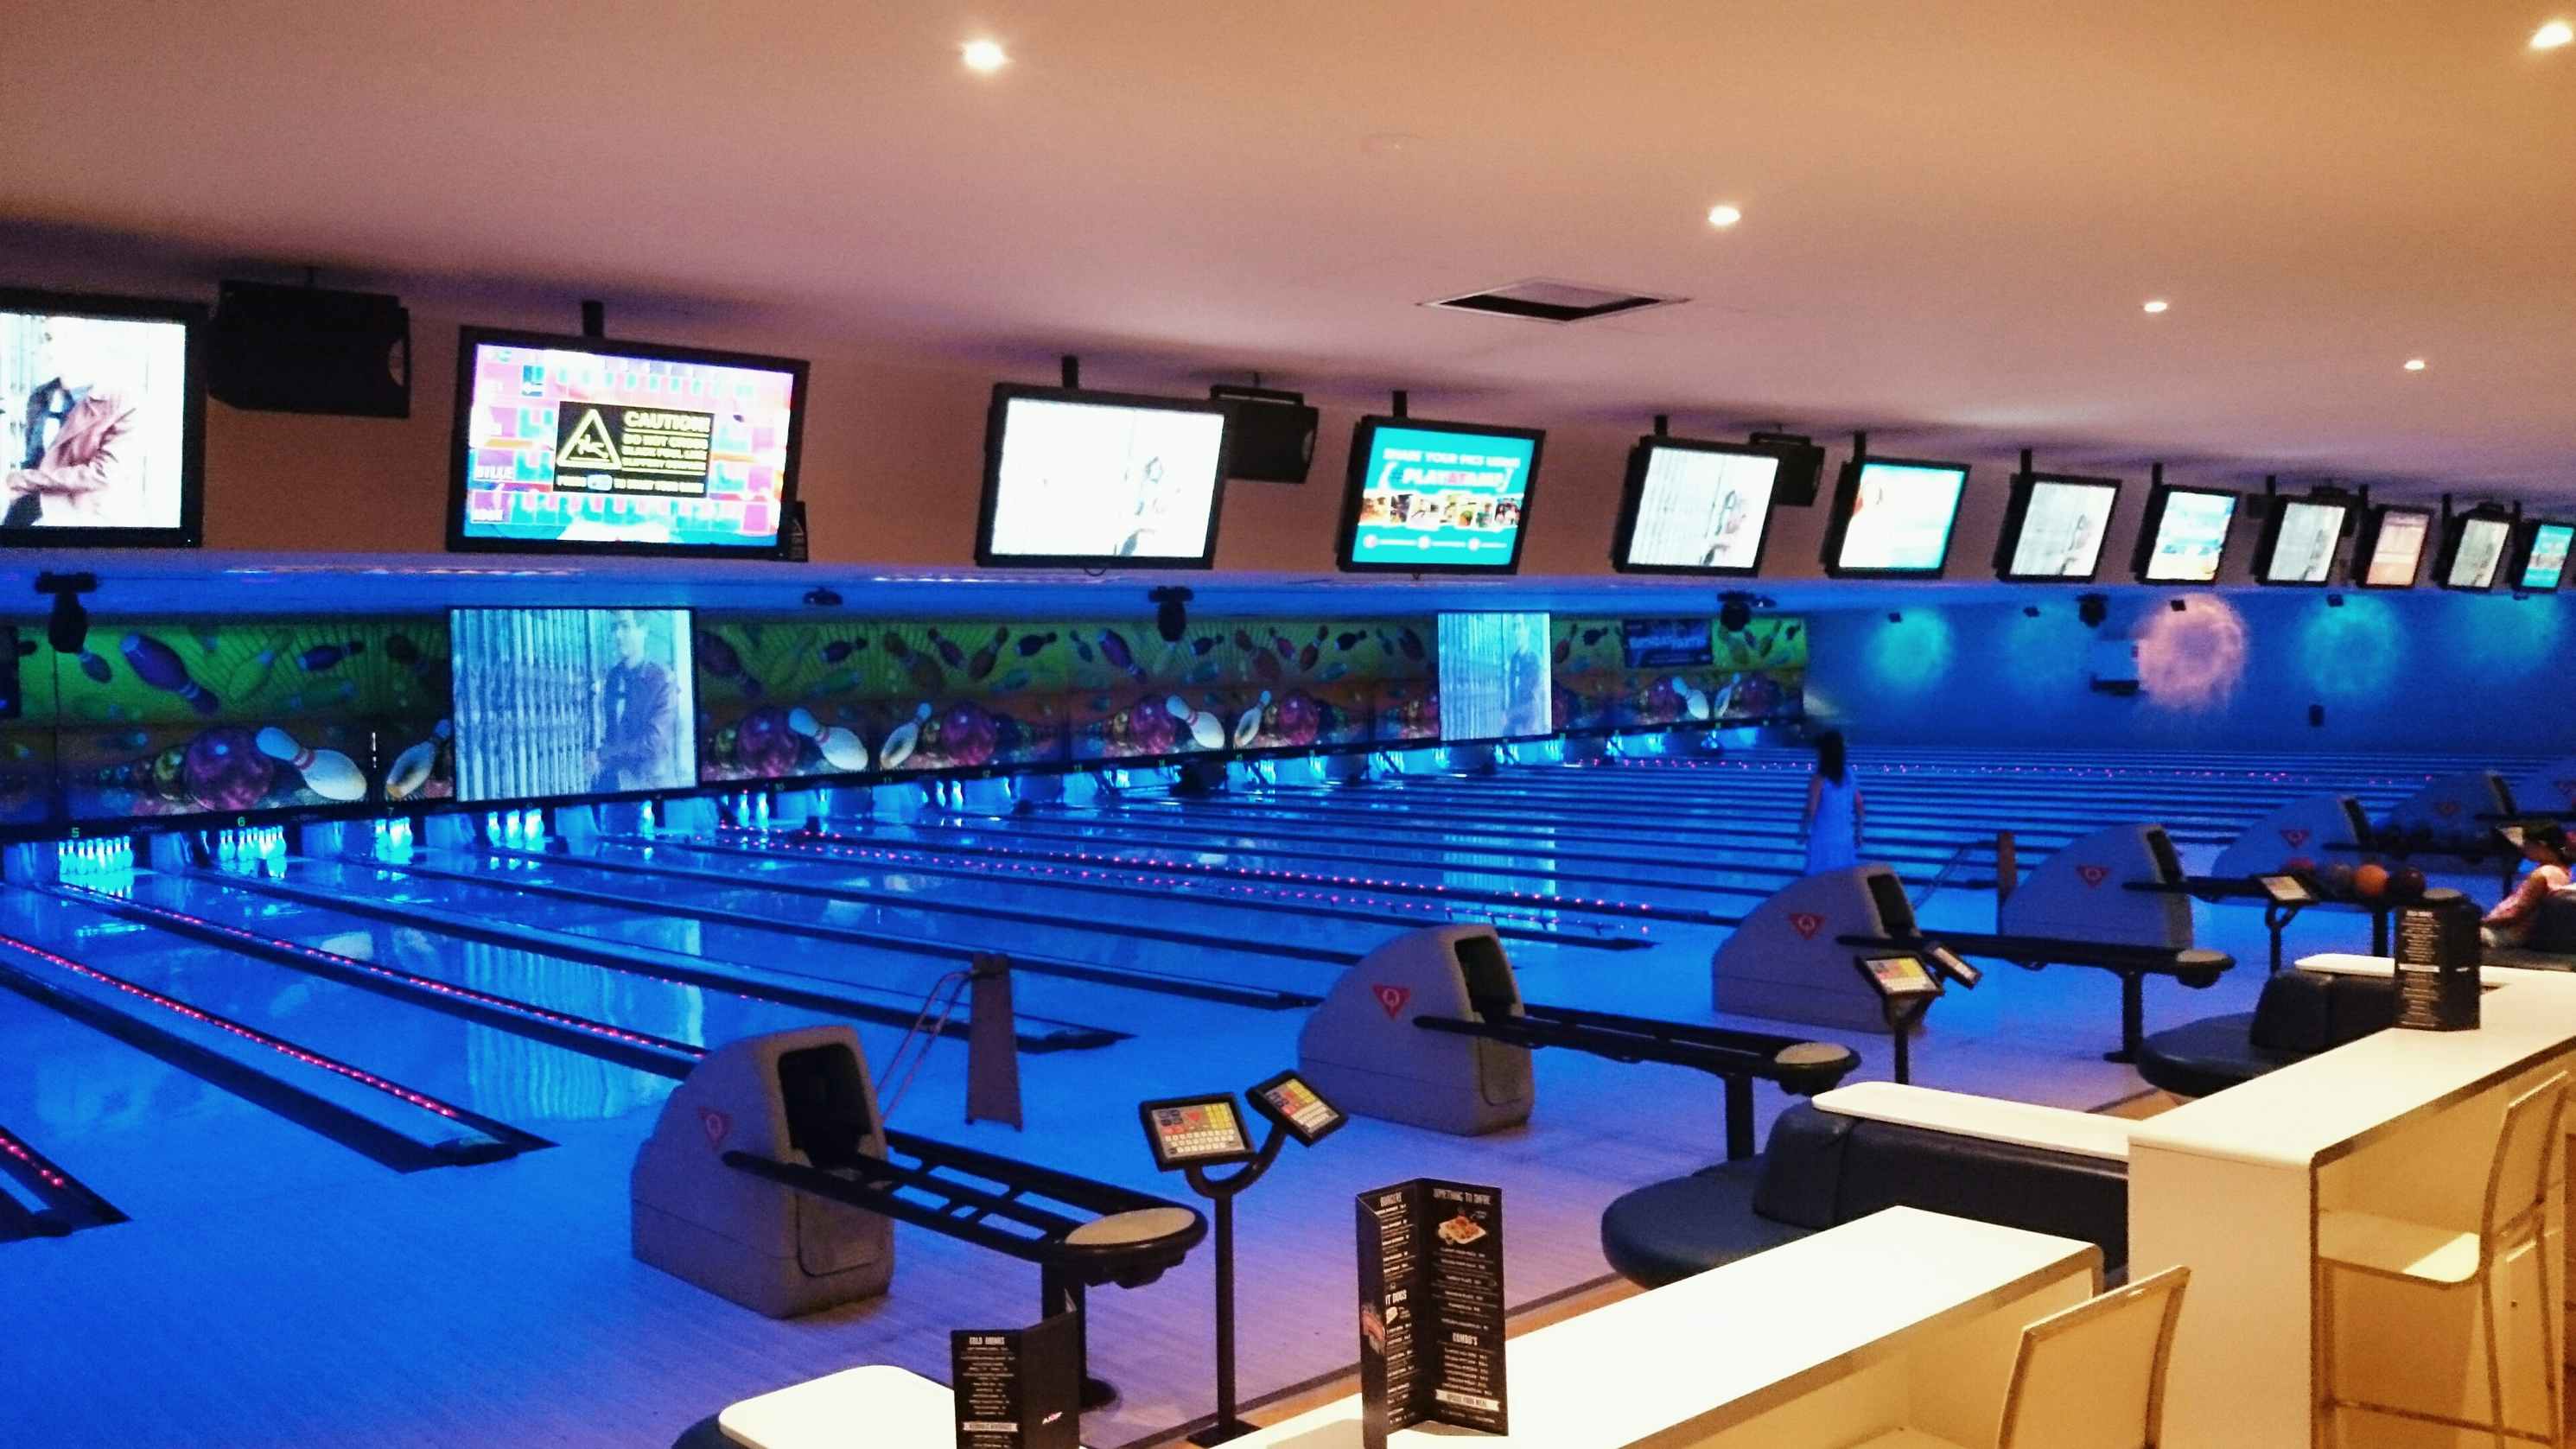 Bowling alley lanes with blue lighting